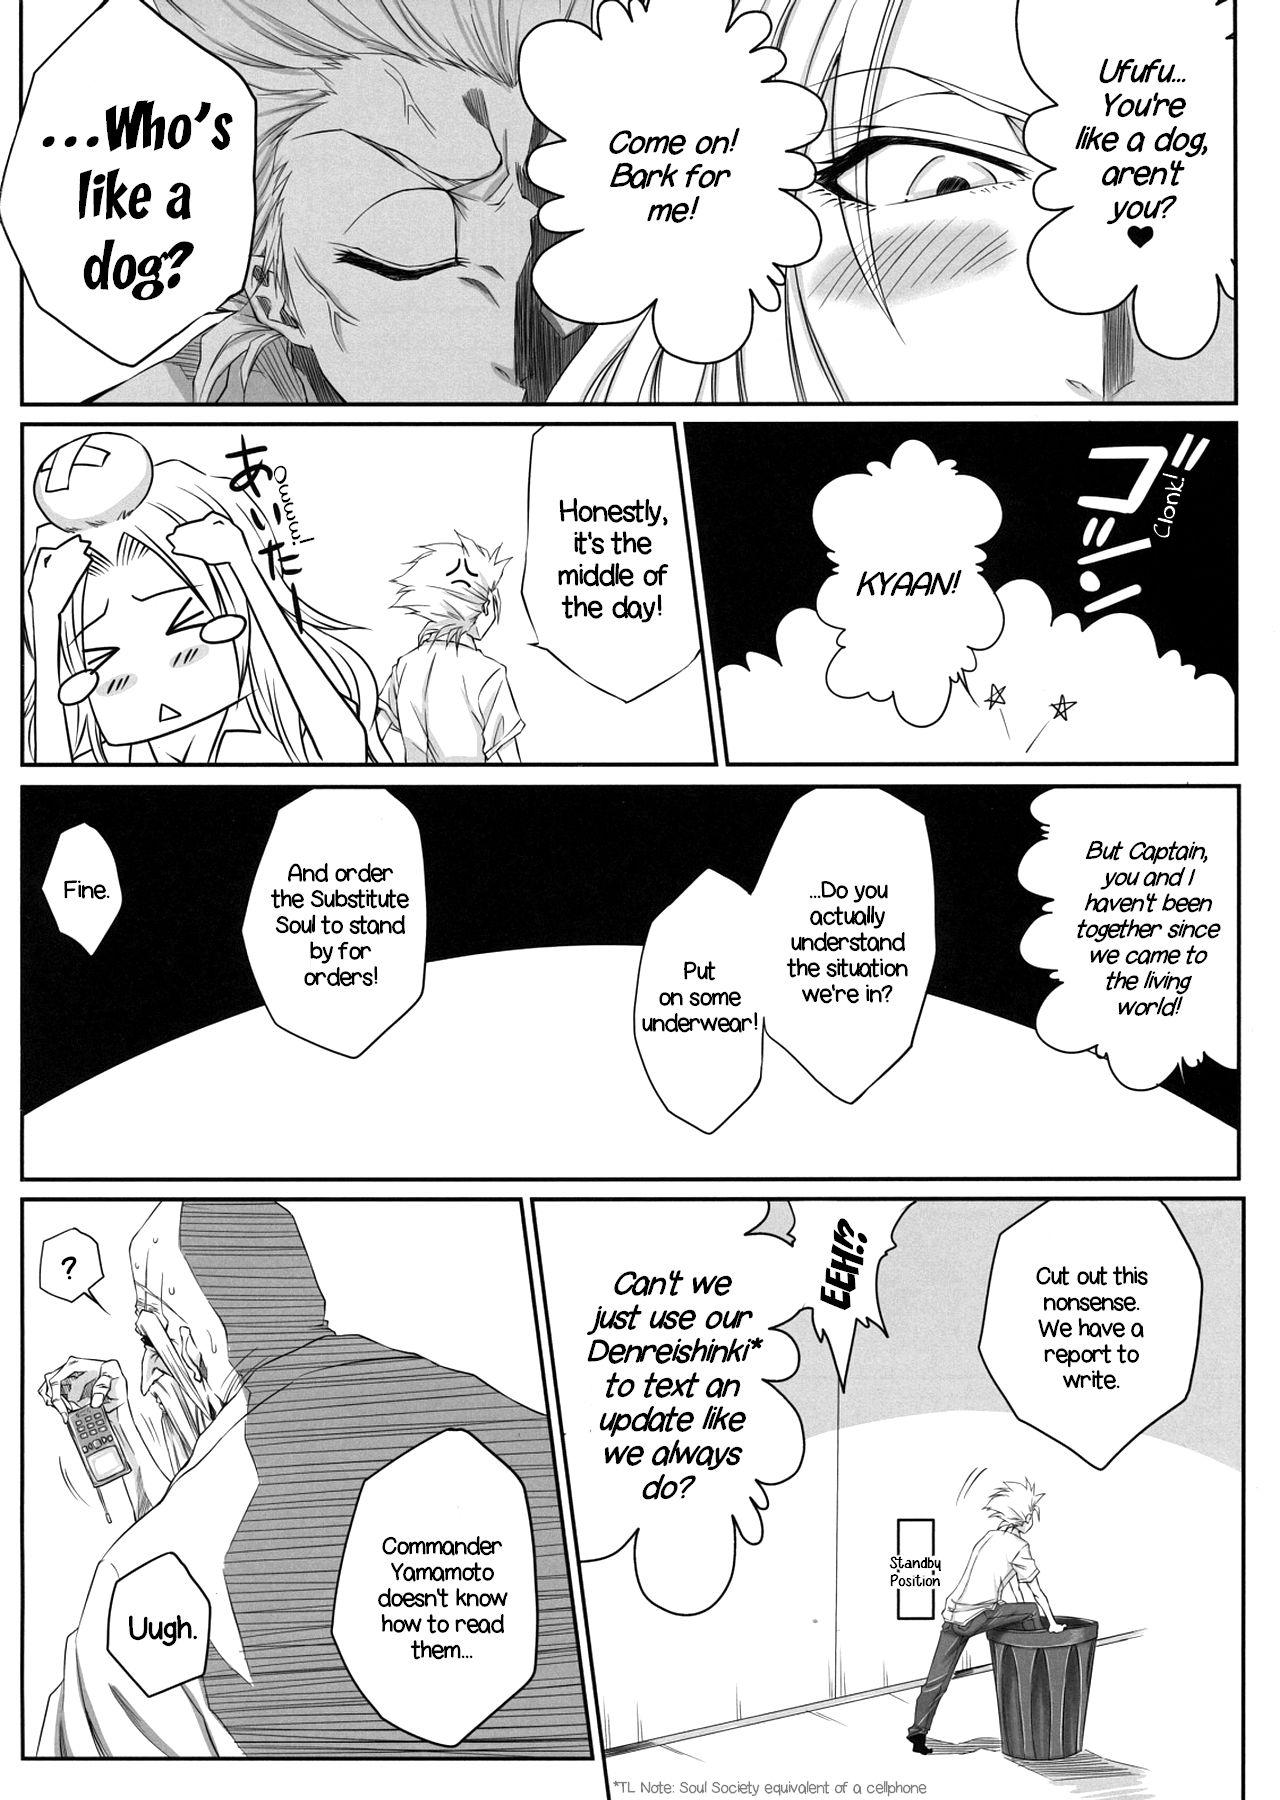 Huge Dick Oh | Ruler - Bleach Dirty - Page 3